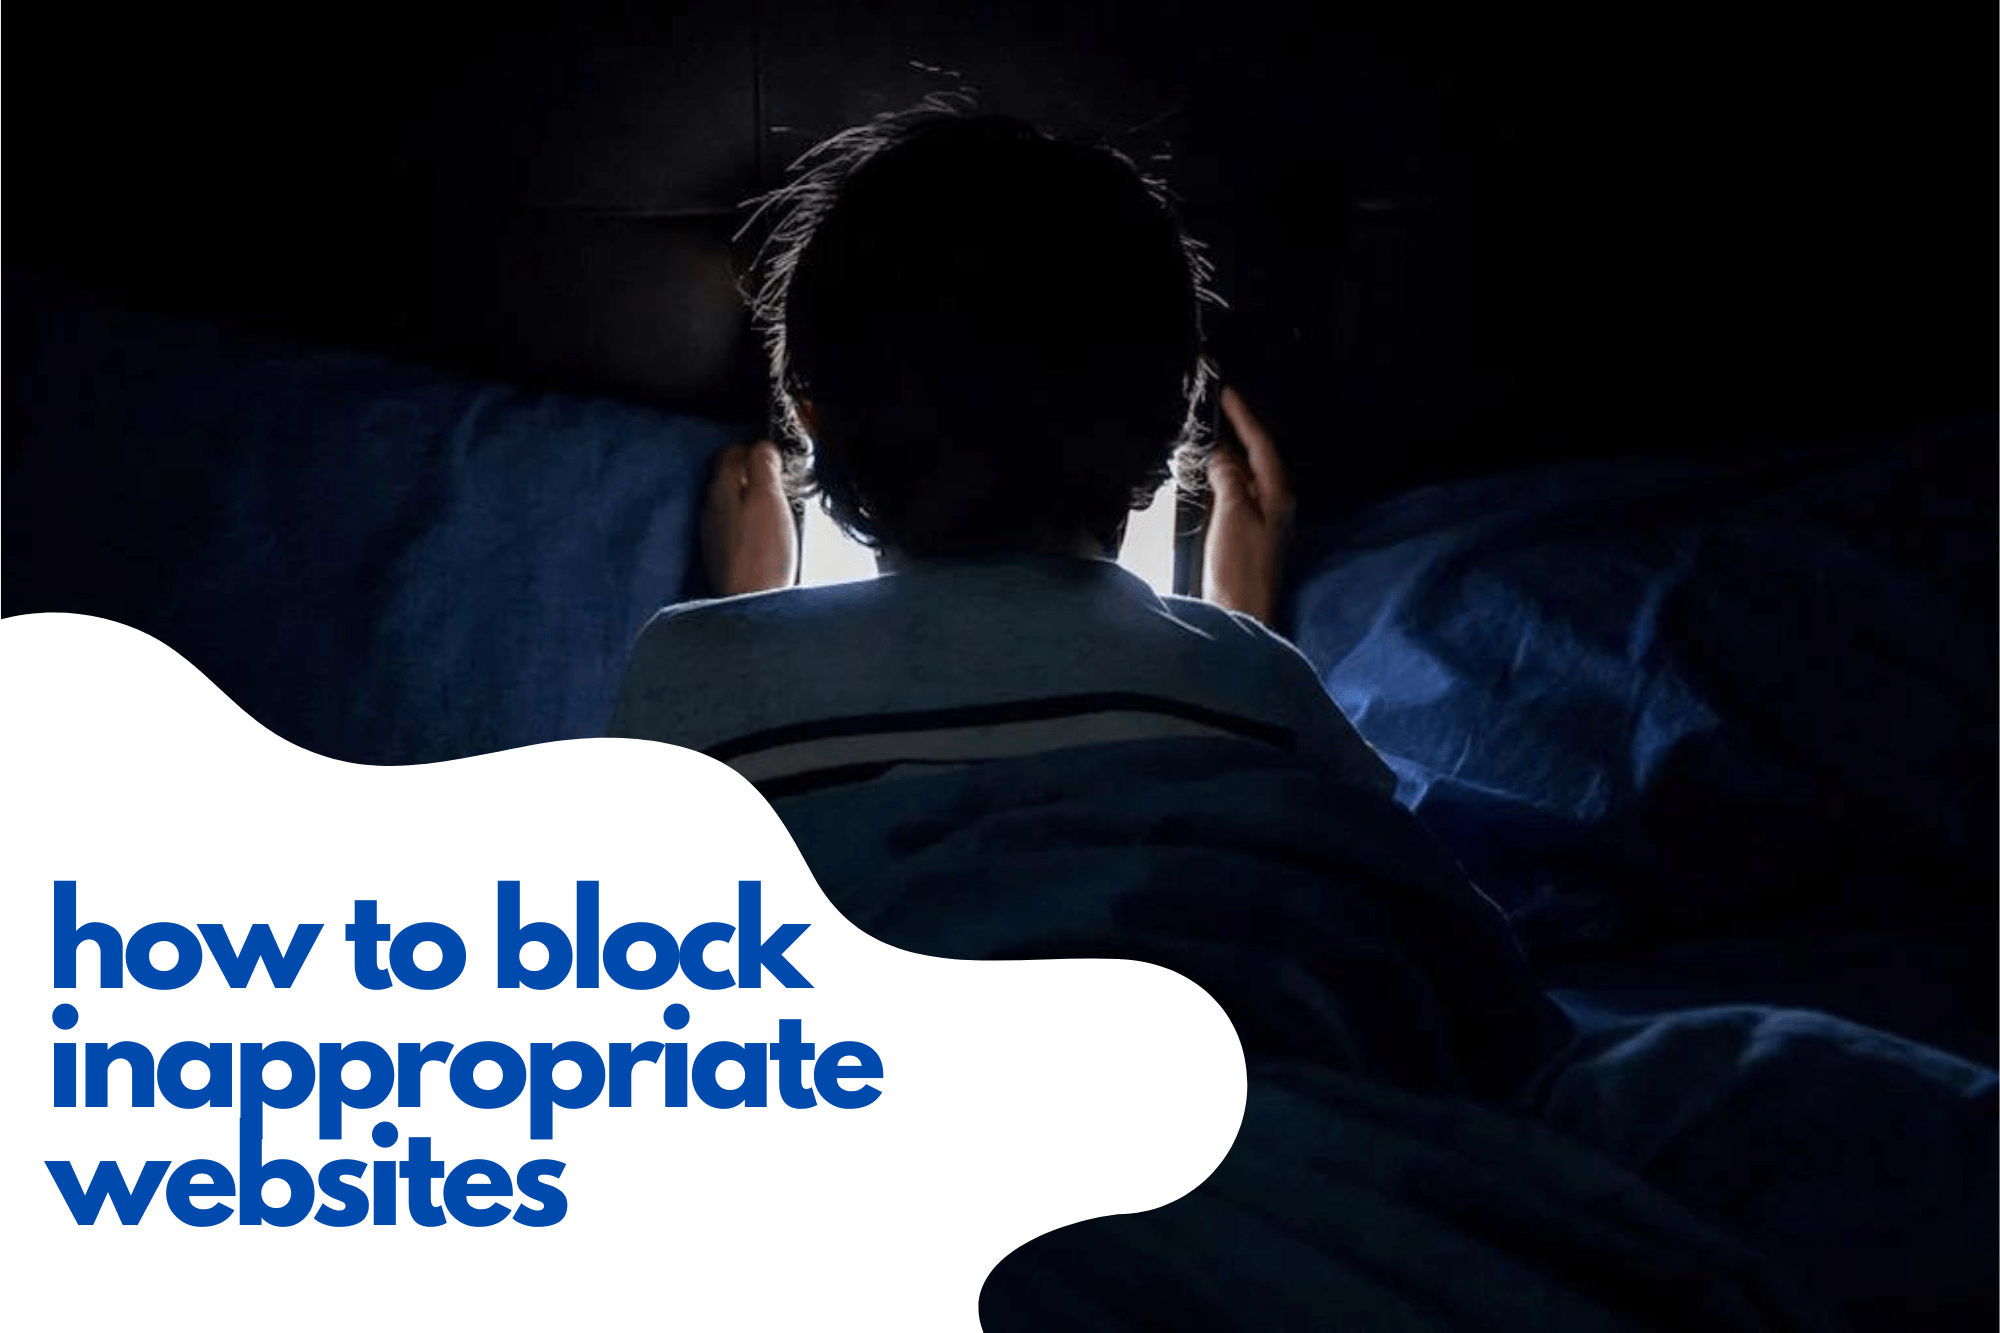 How to block inappropriate websites on Android